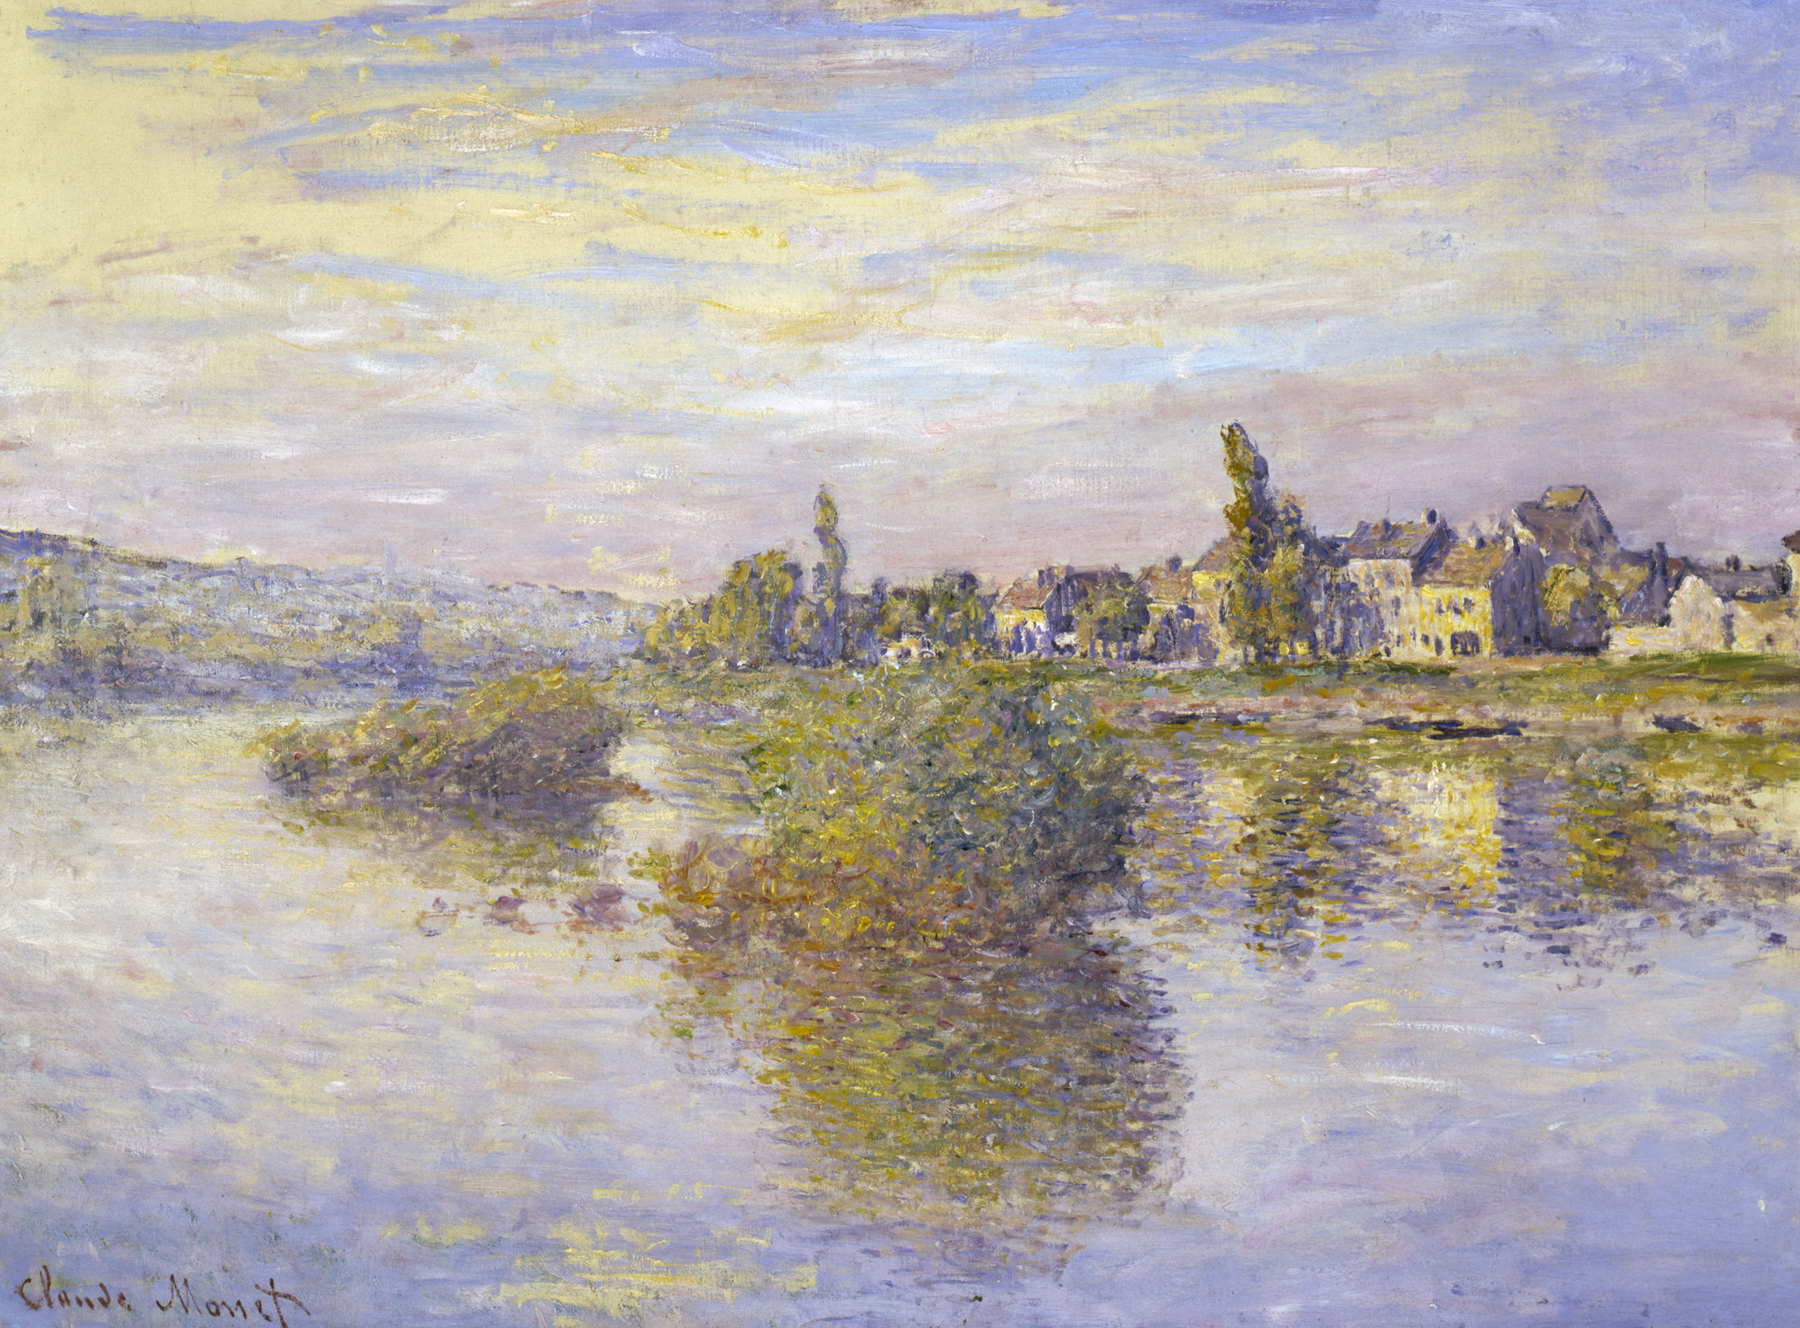 To catch the shimmer truly, Monet's "Banks of the Seine at Lavacourt" (1879) should be seen in the original.